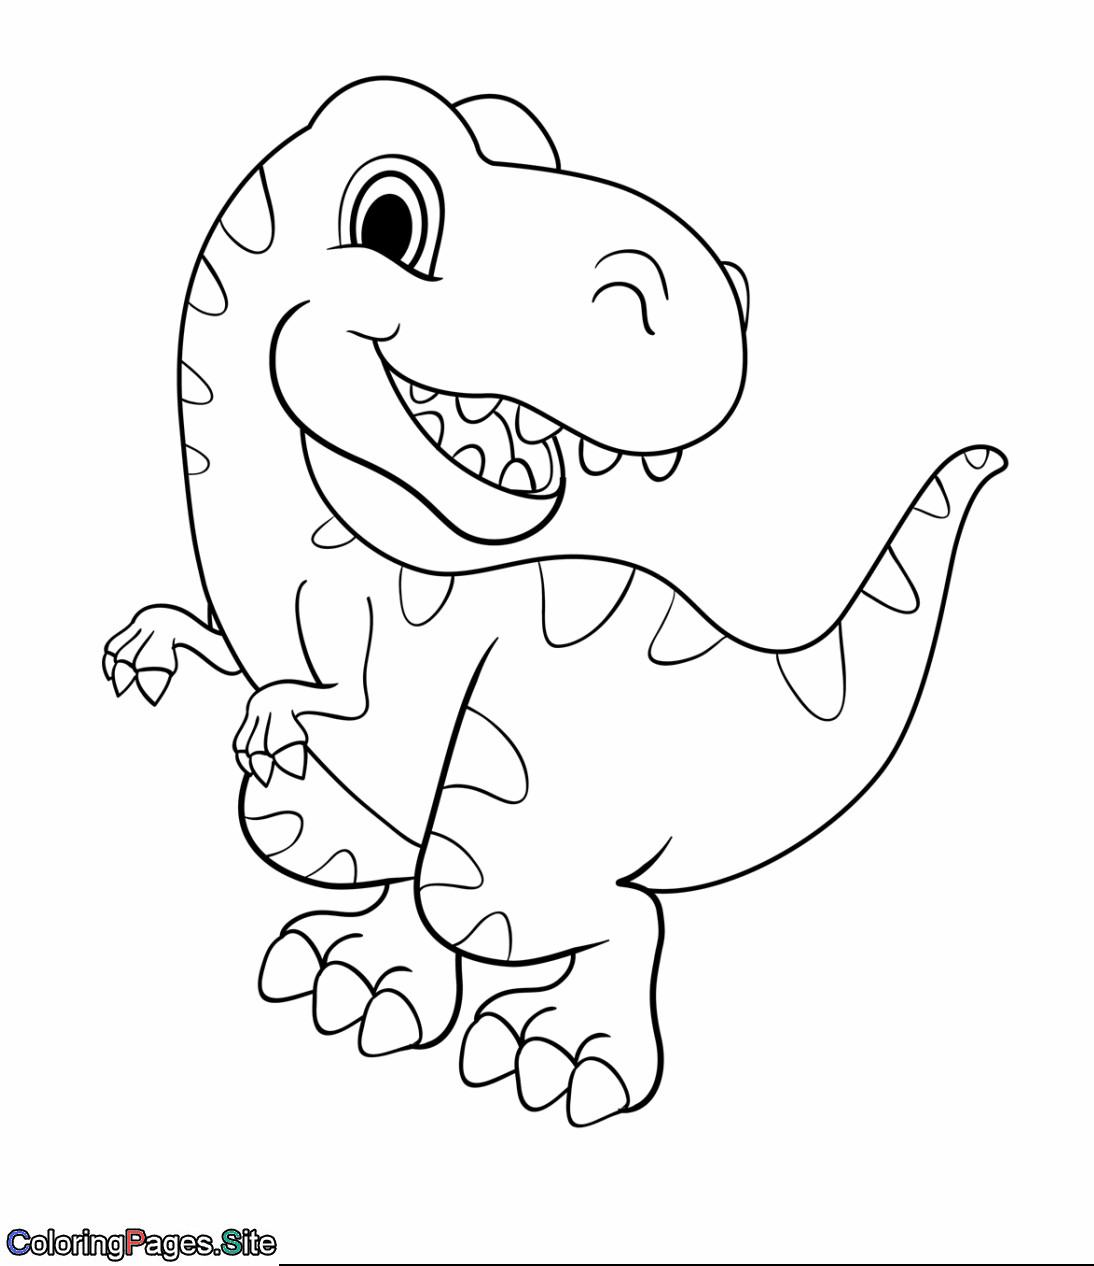 Dinosaur Coloring Pages For Toddlers
 Baby dinosaur coloring page